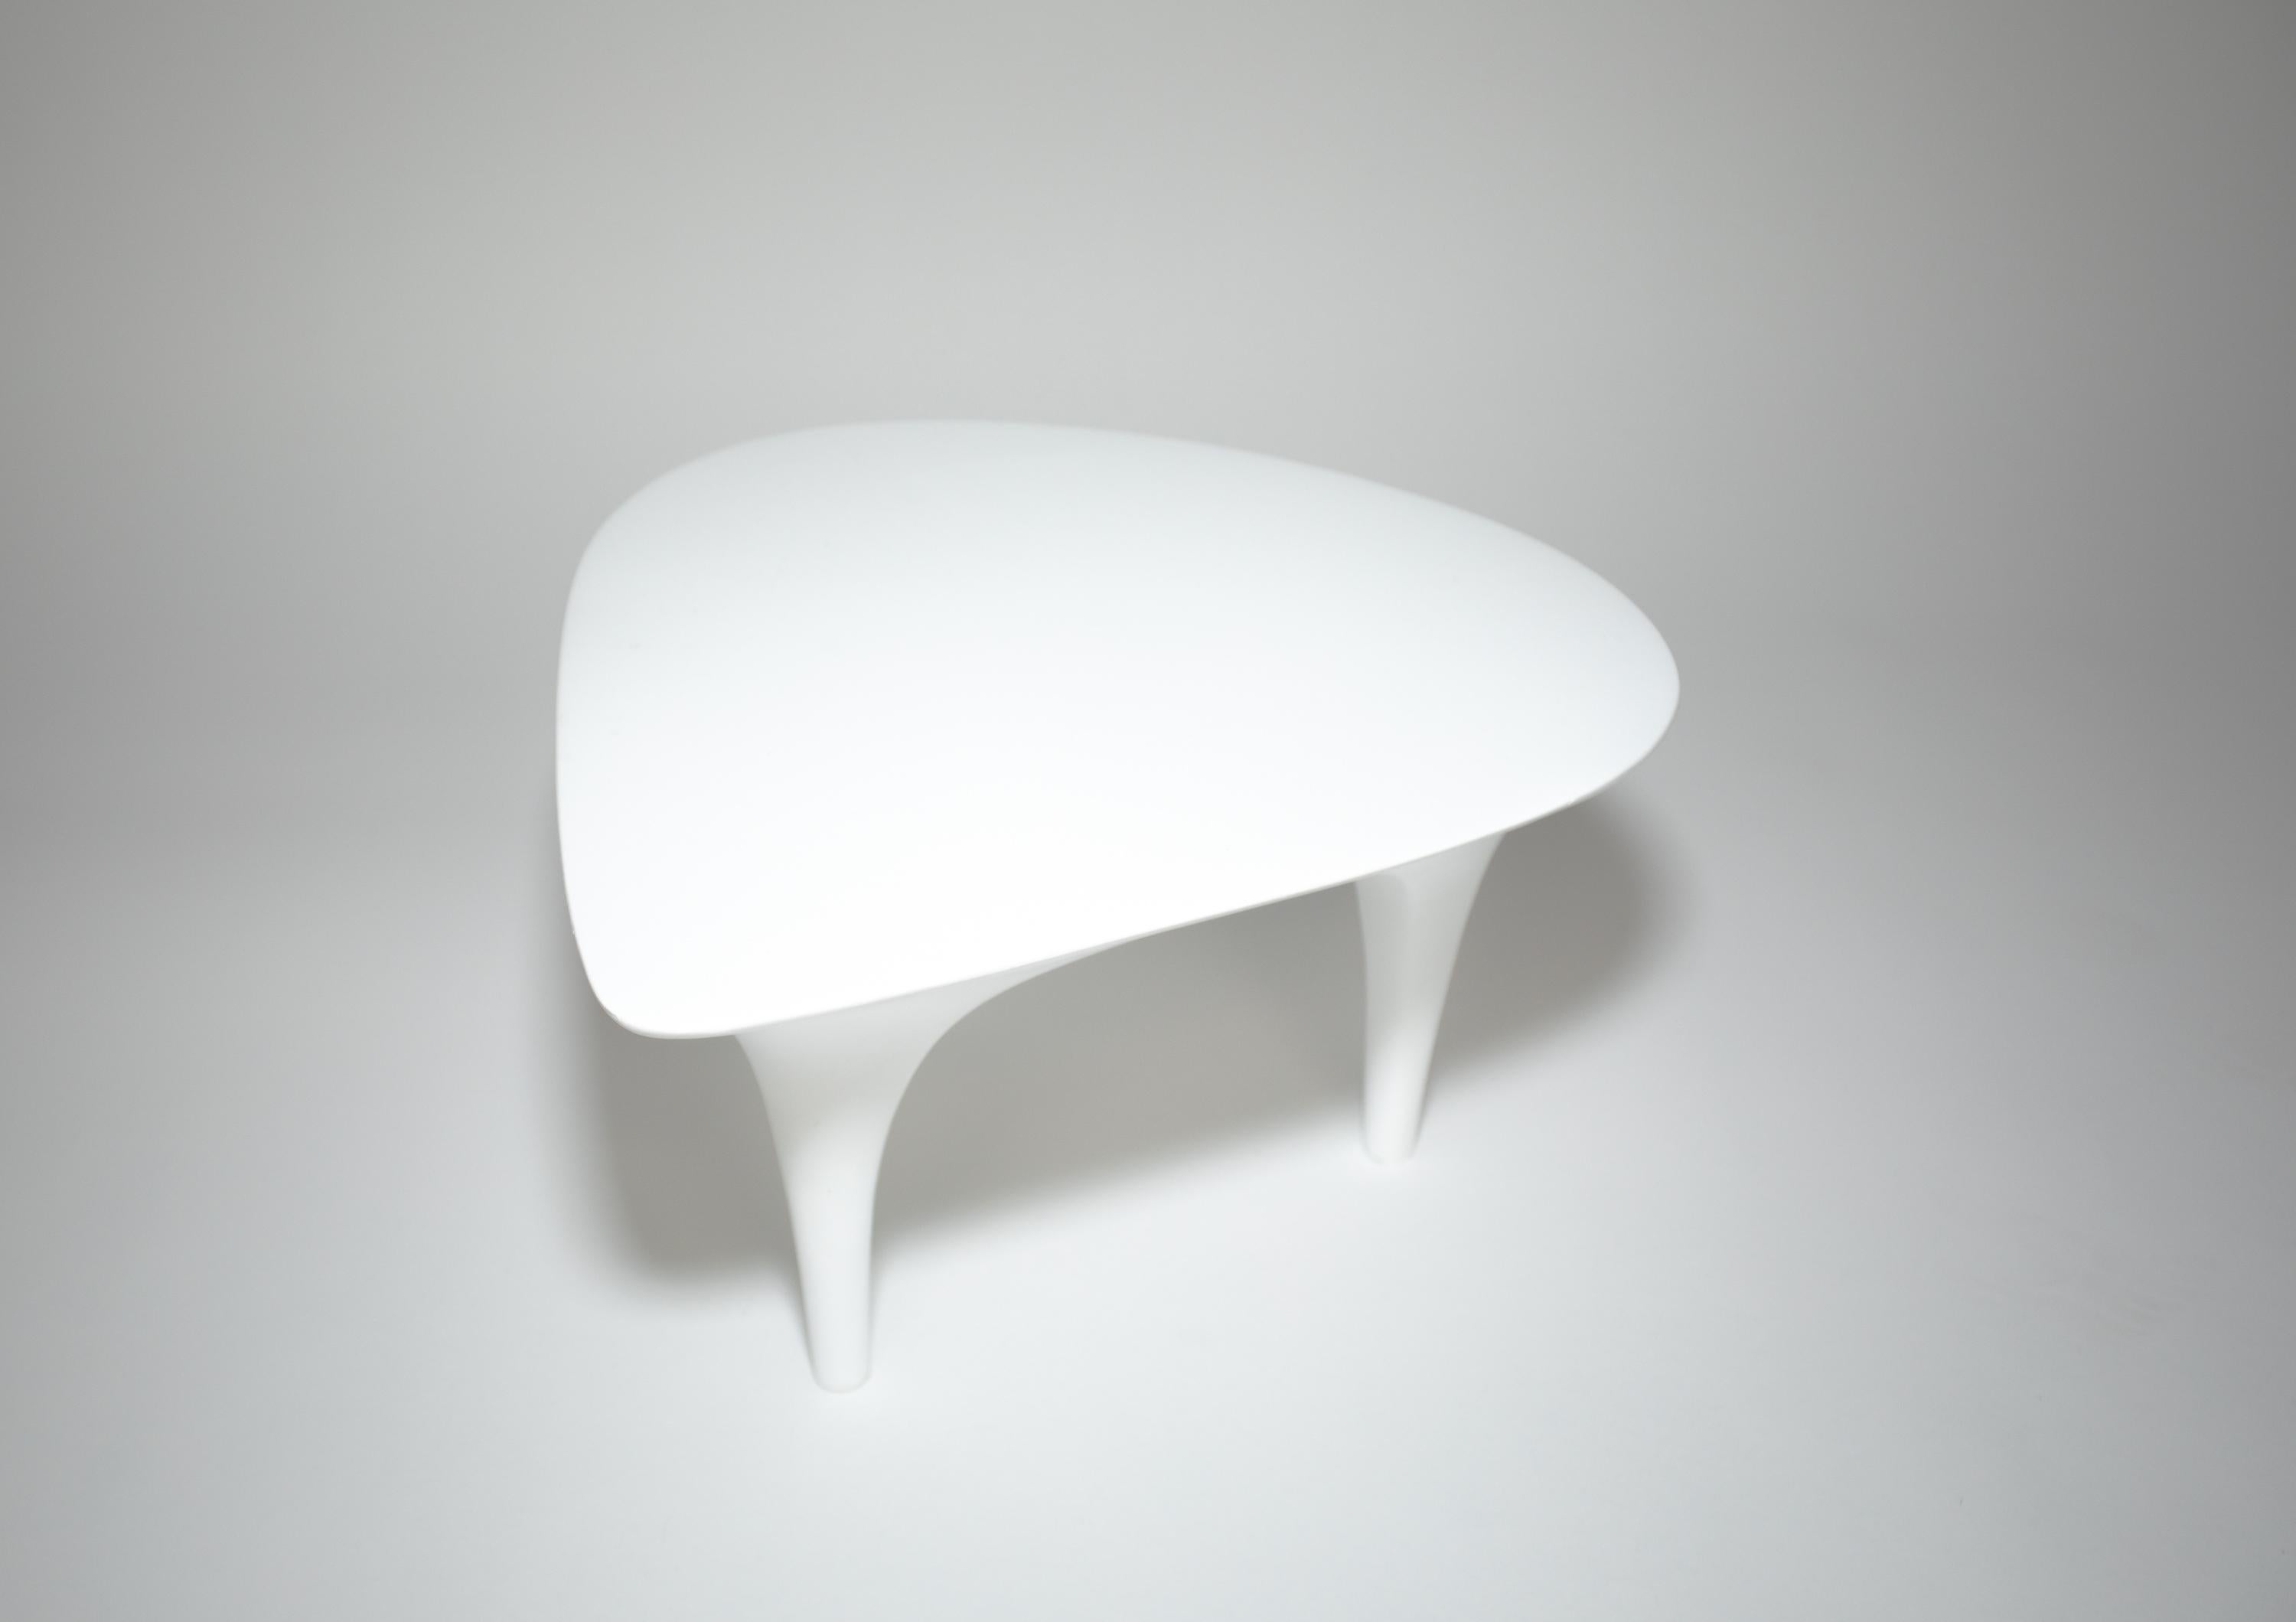 Composition White Lacquered Biomorphic Table For Sale